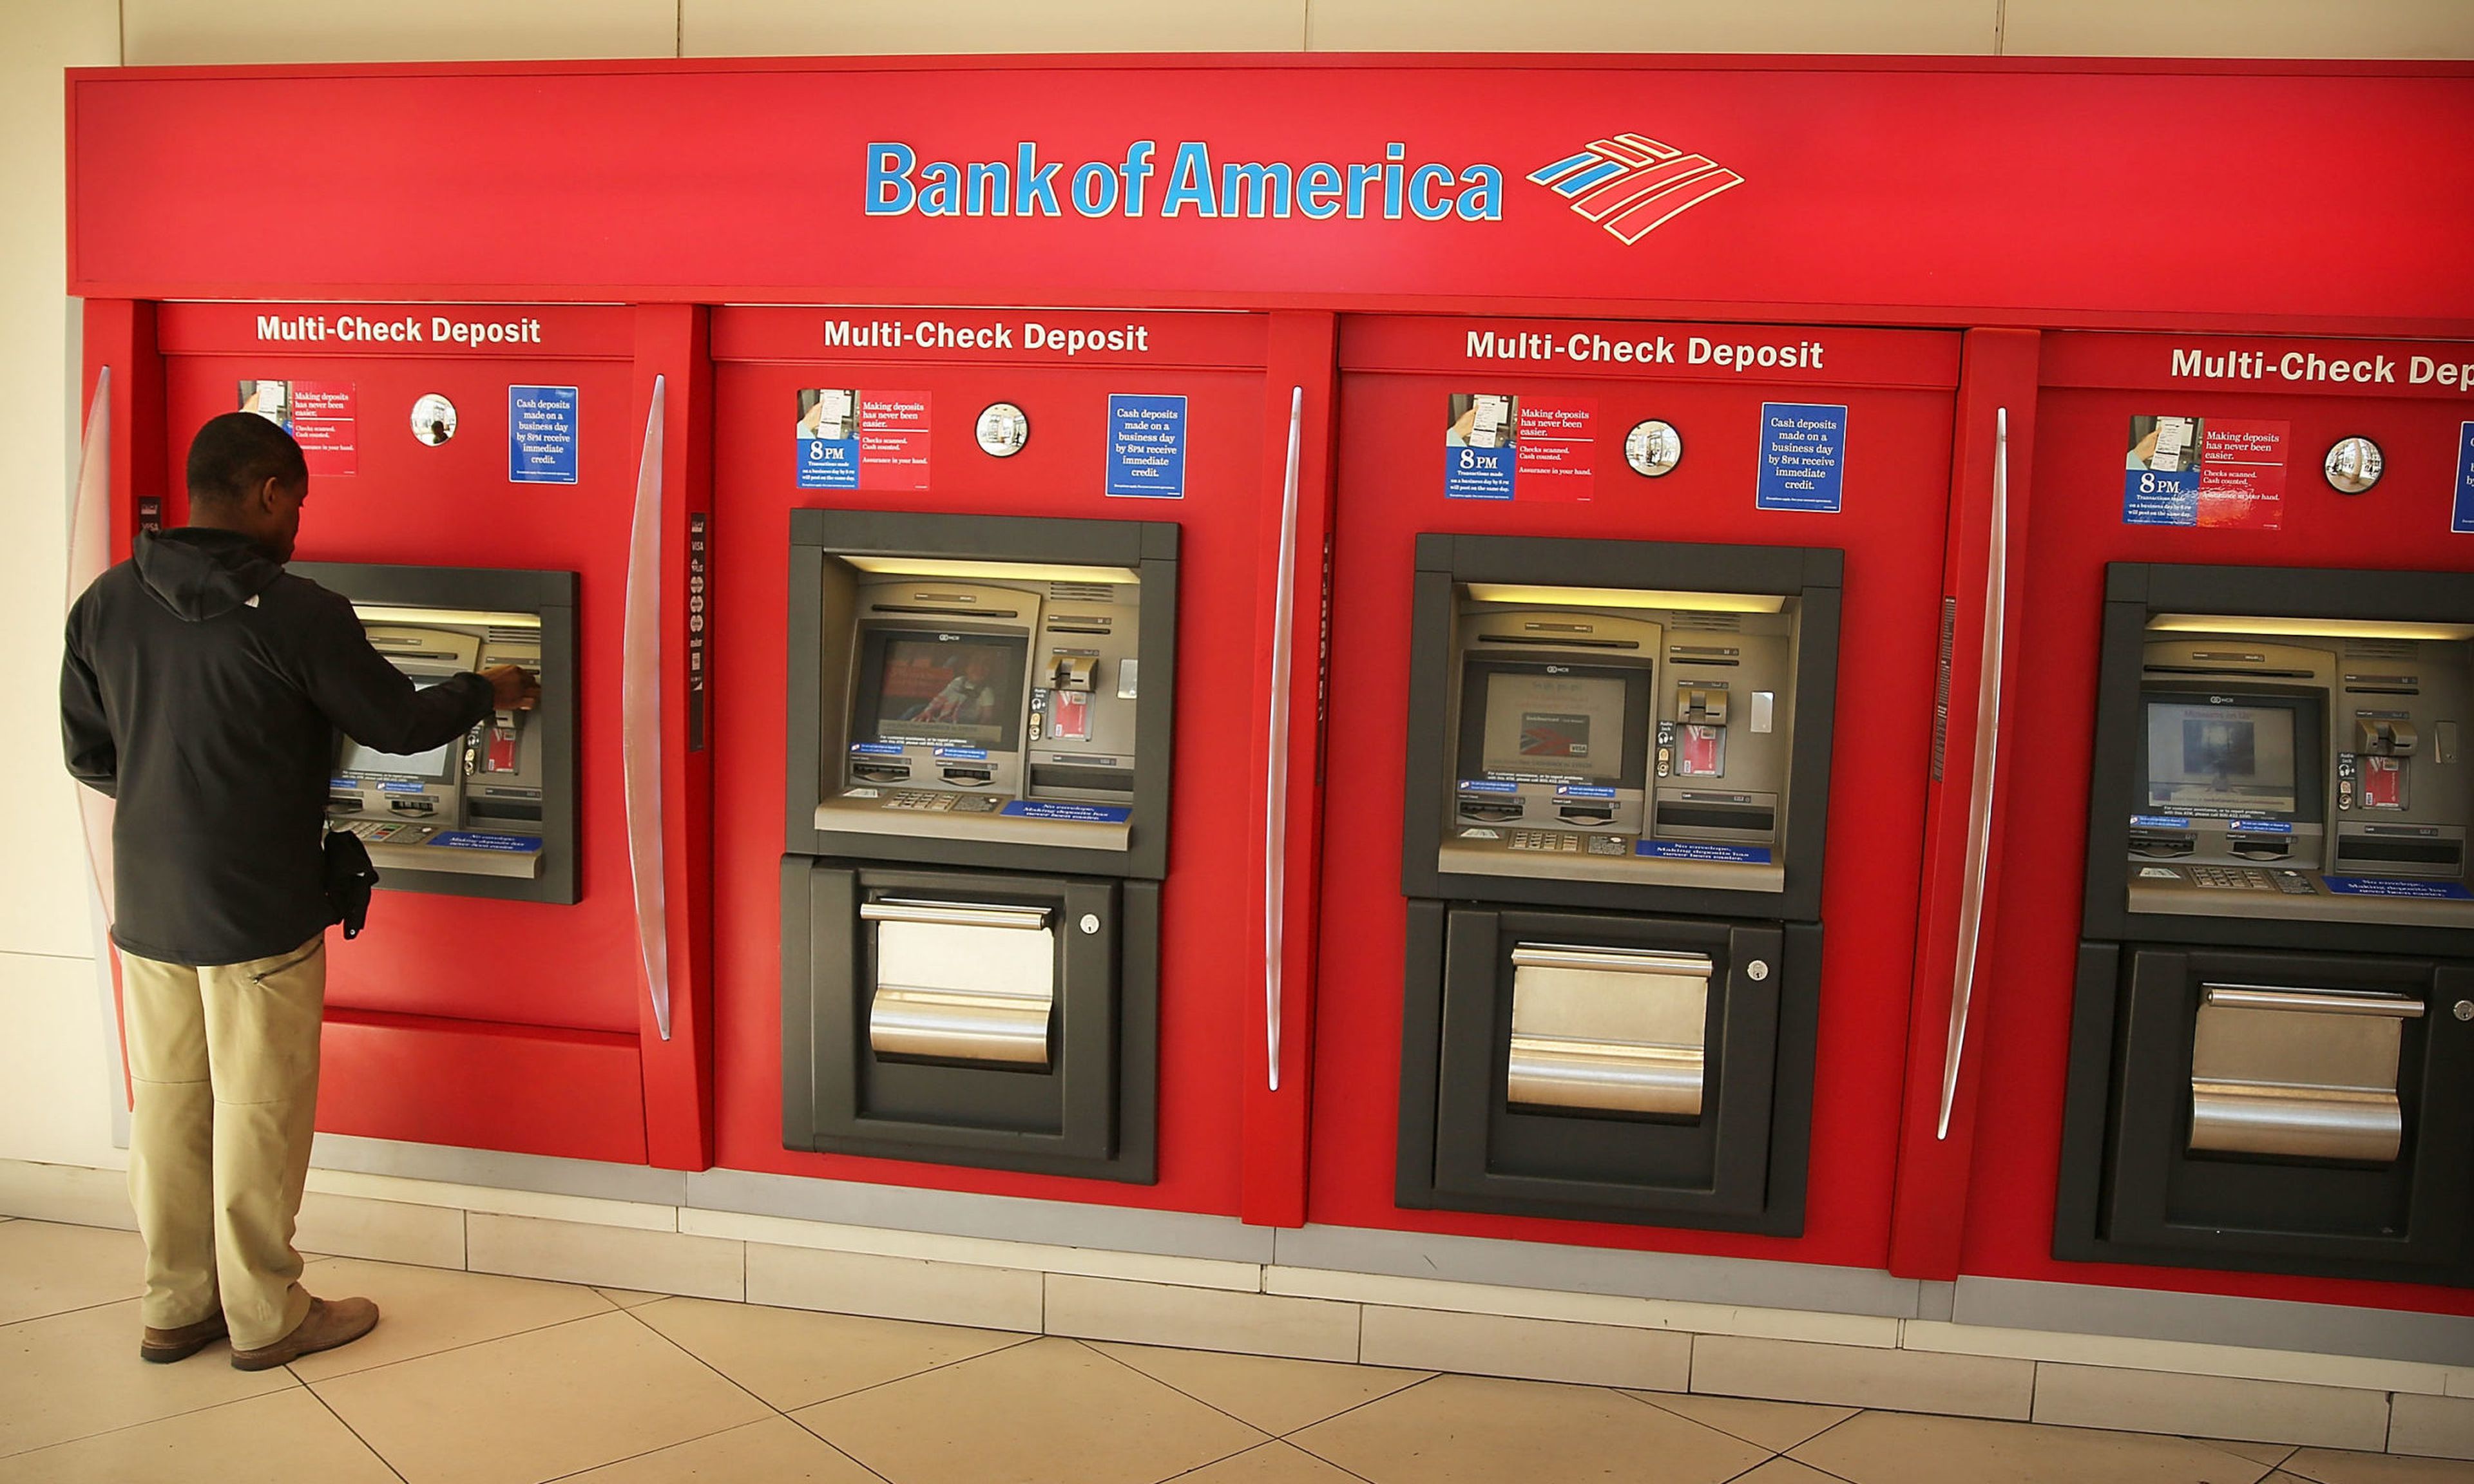 A man uses an ATM at a Bank of America branch on April 16, 2014, in New York City. (Photo by Spencer Platt/Getty Images)